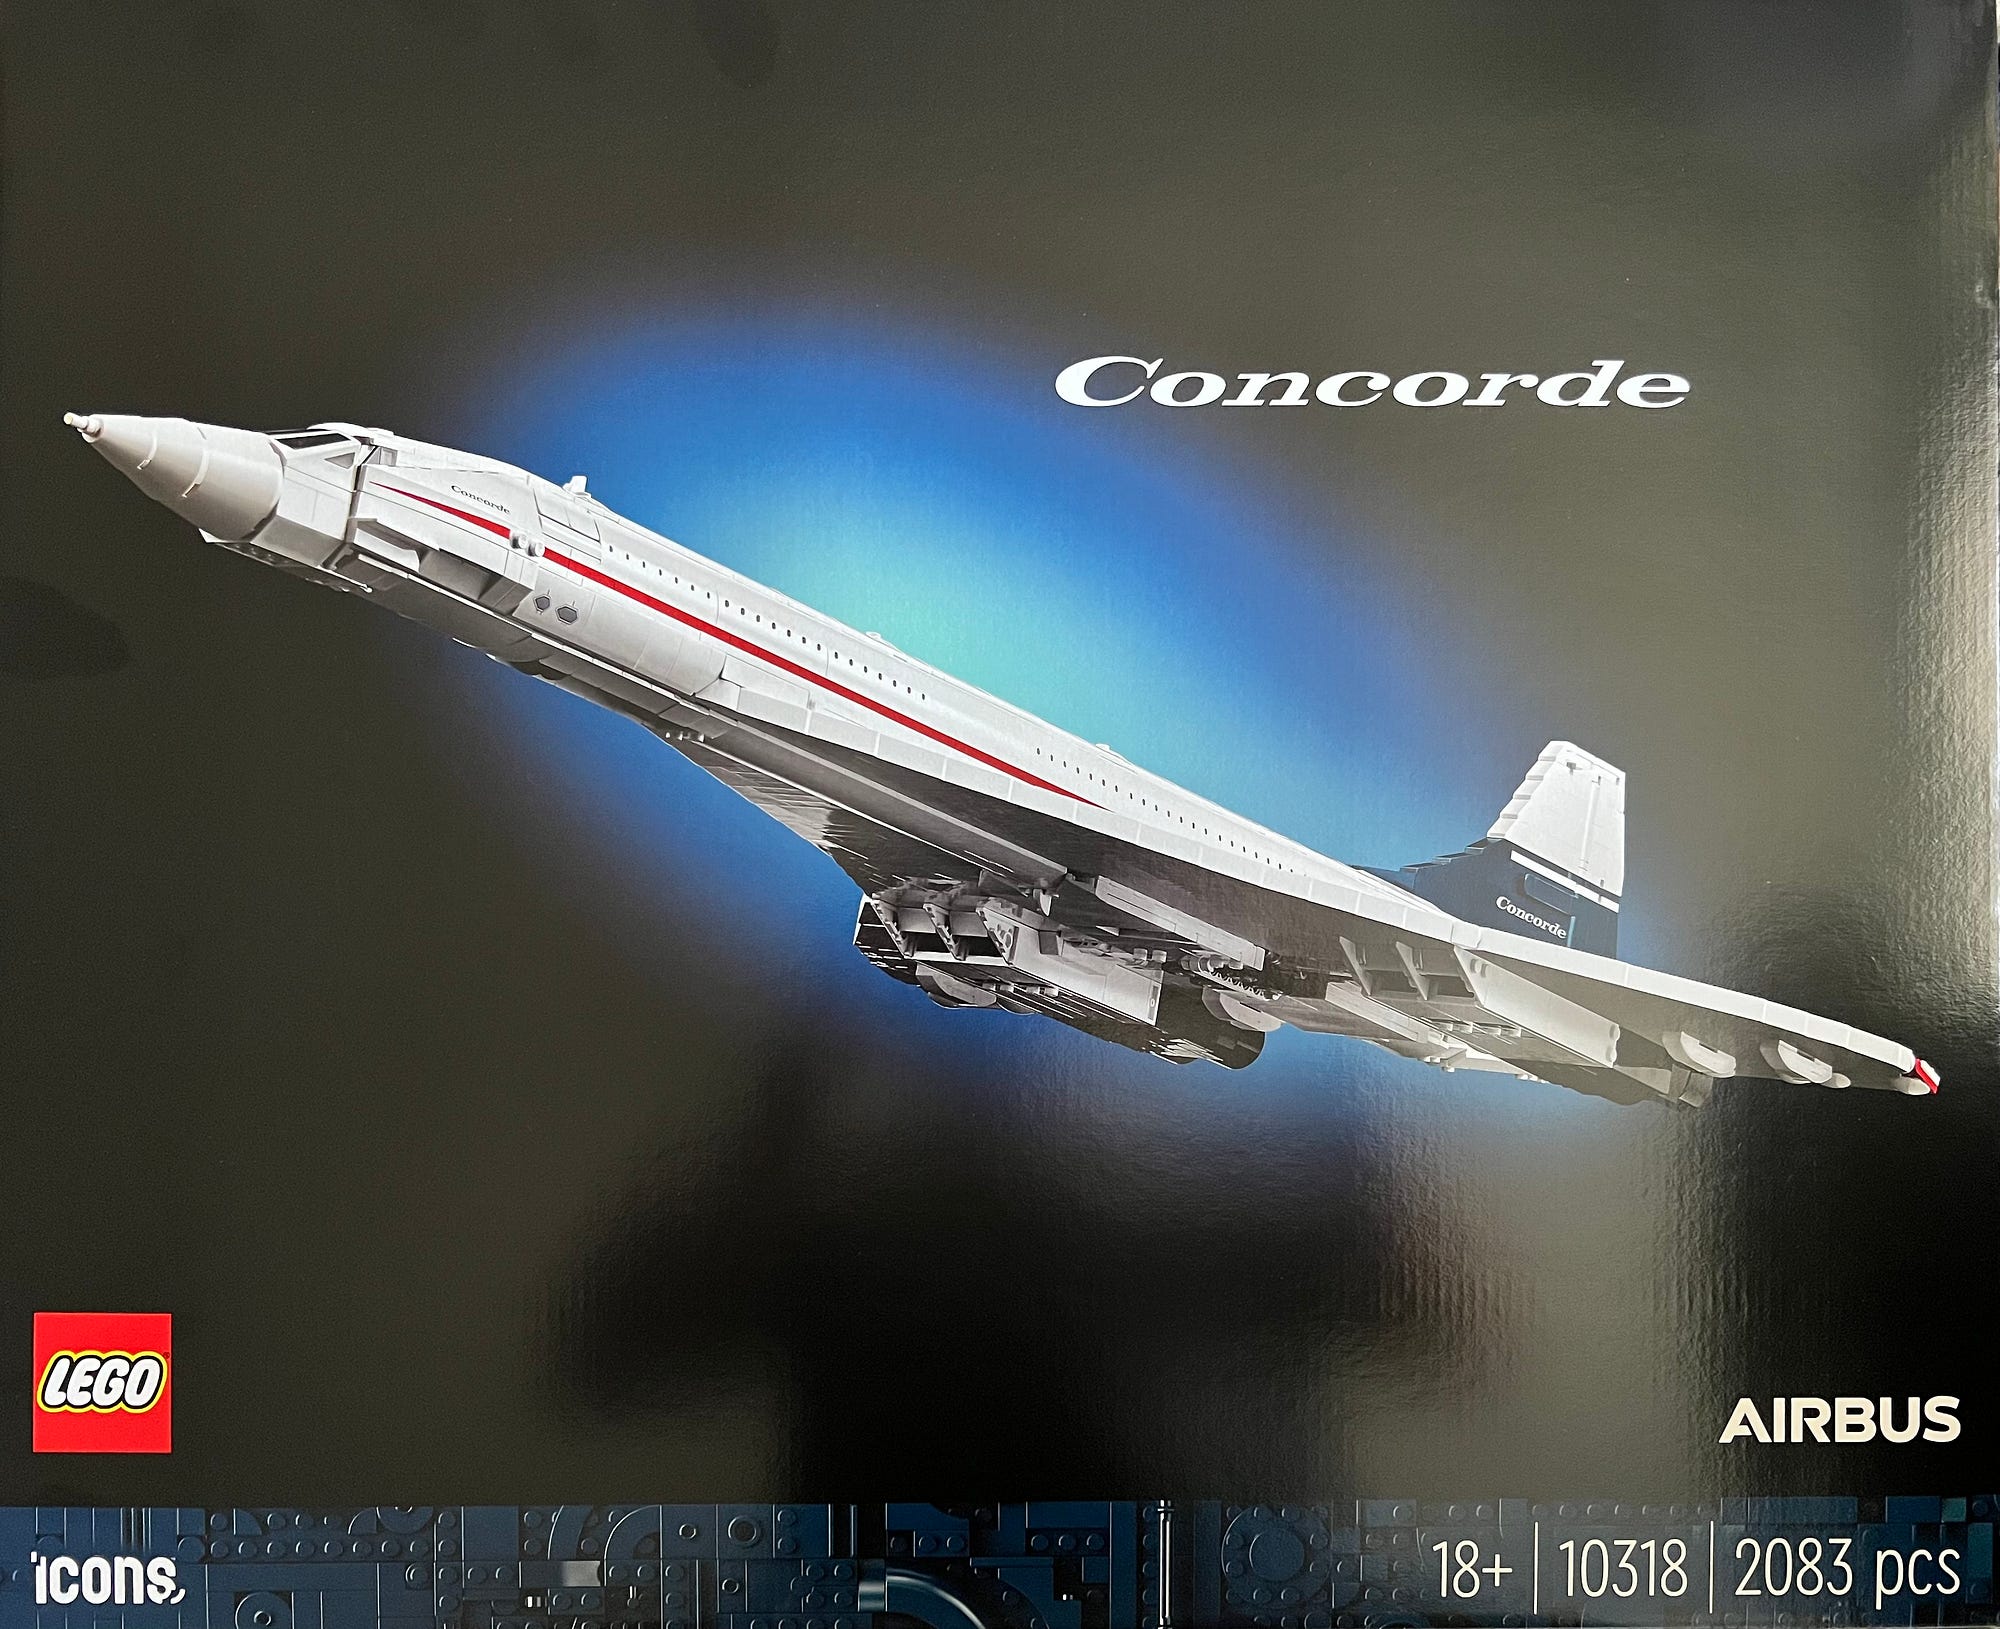 LEGO Pays Tribute To The Concorde And Goes Supersonic, by Attila Vágó, Bricks n' Brackets